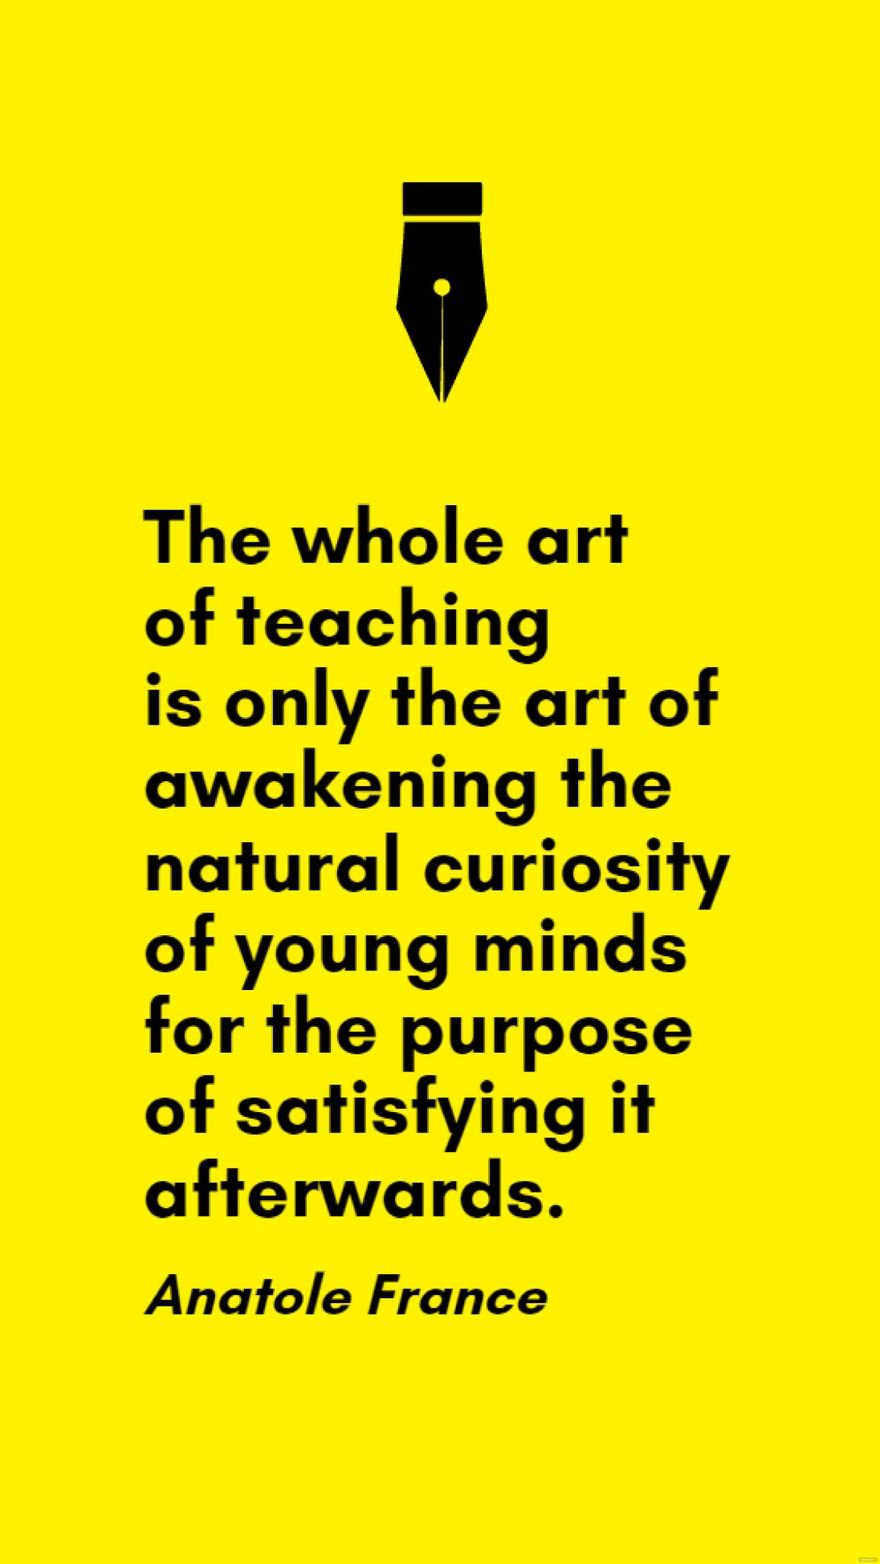 Free Anatole France - The whole art of teaching is only the art of awakening the natural curiosity of young minds for the purpose of satisfying it afterwards. in JPG